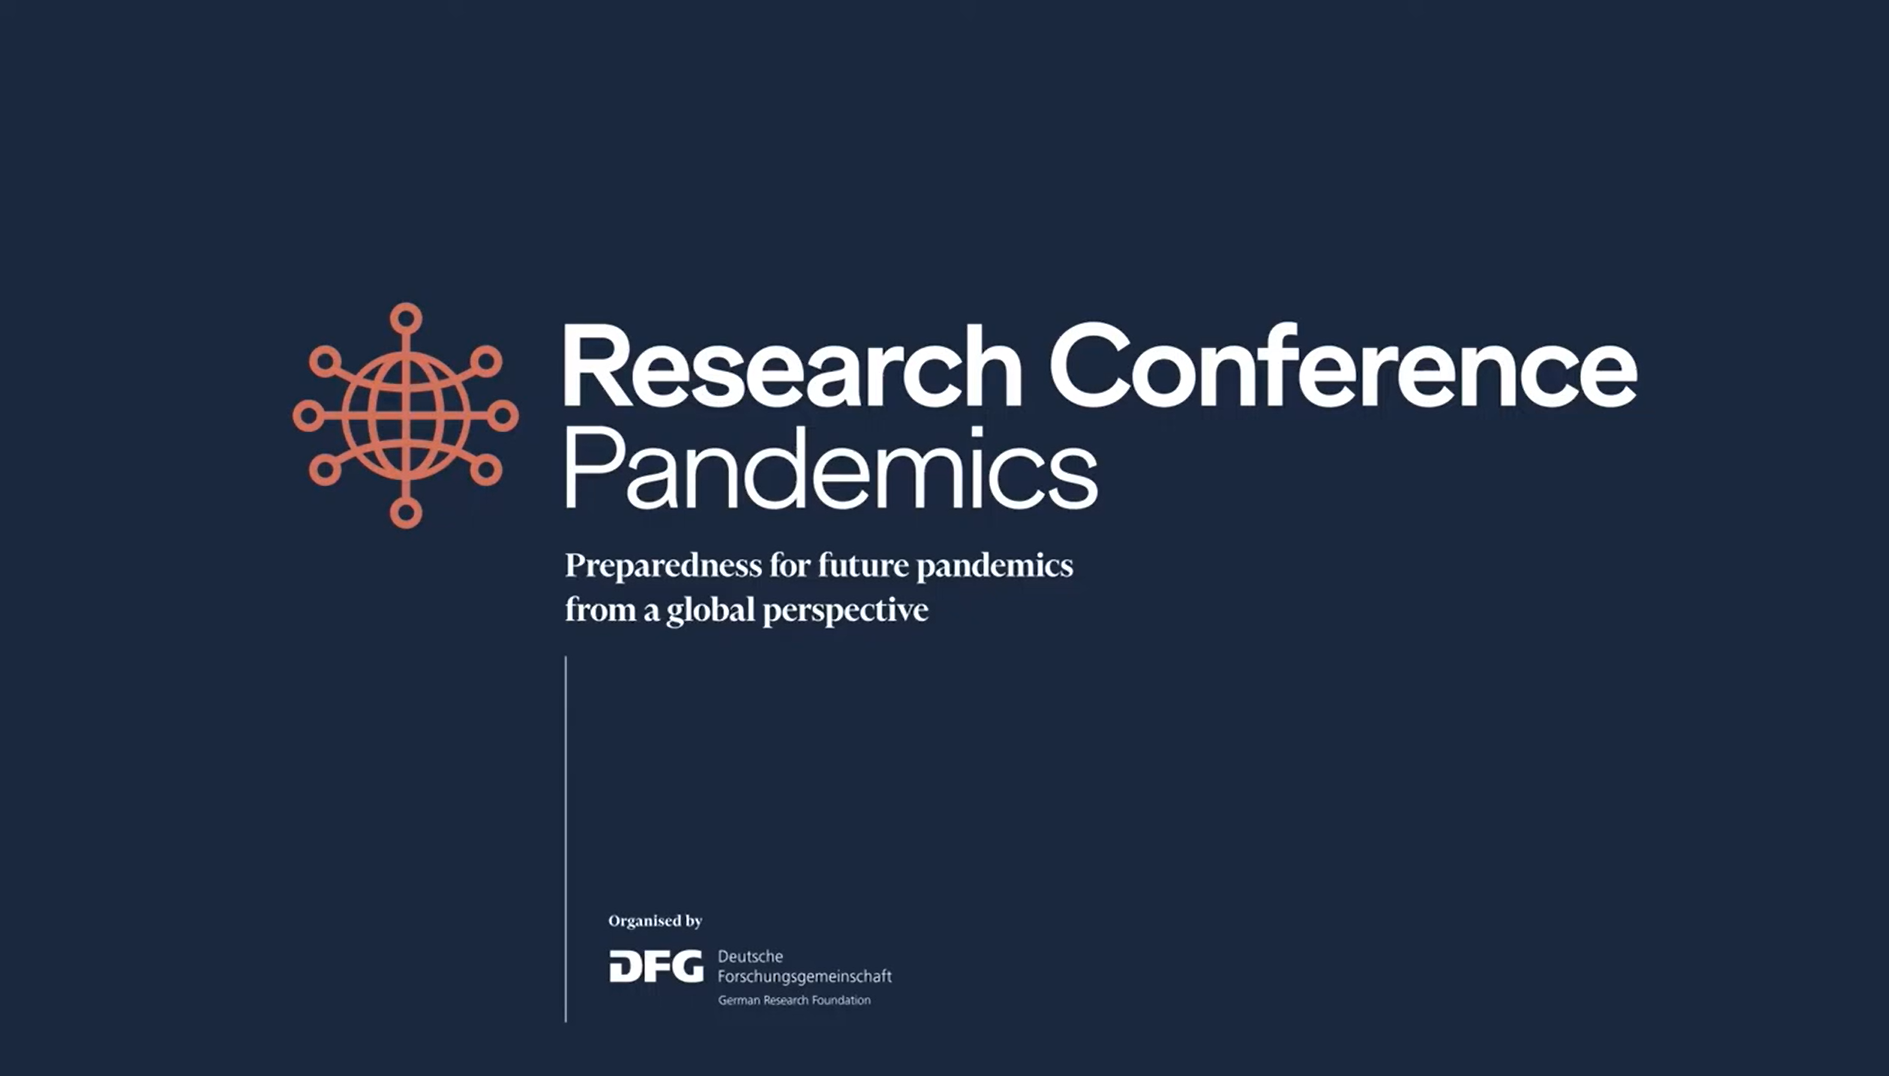 Preparedness for future pandemics from a global perspective